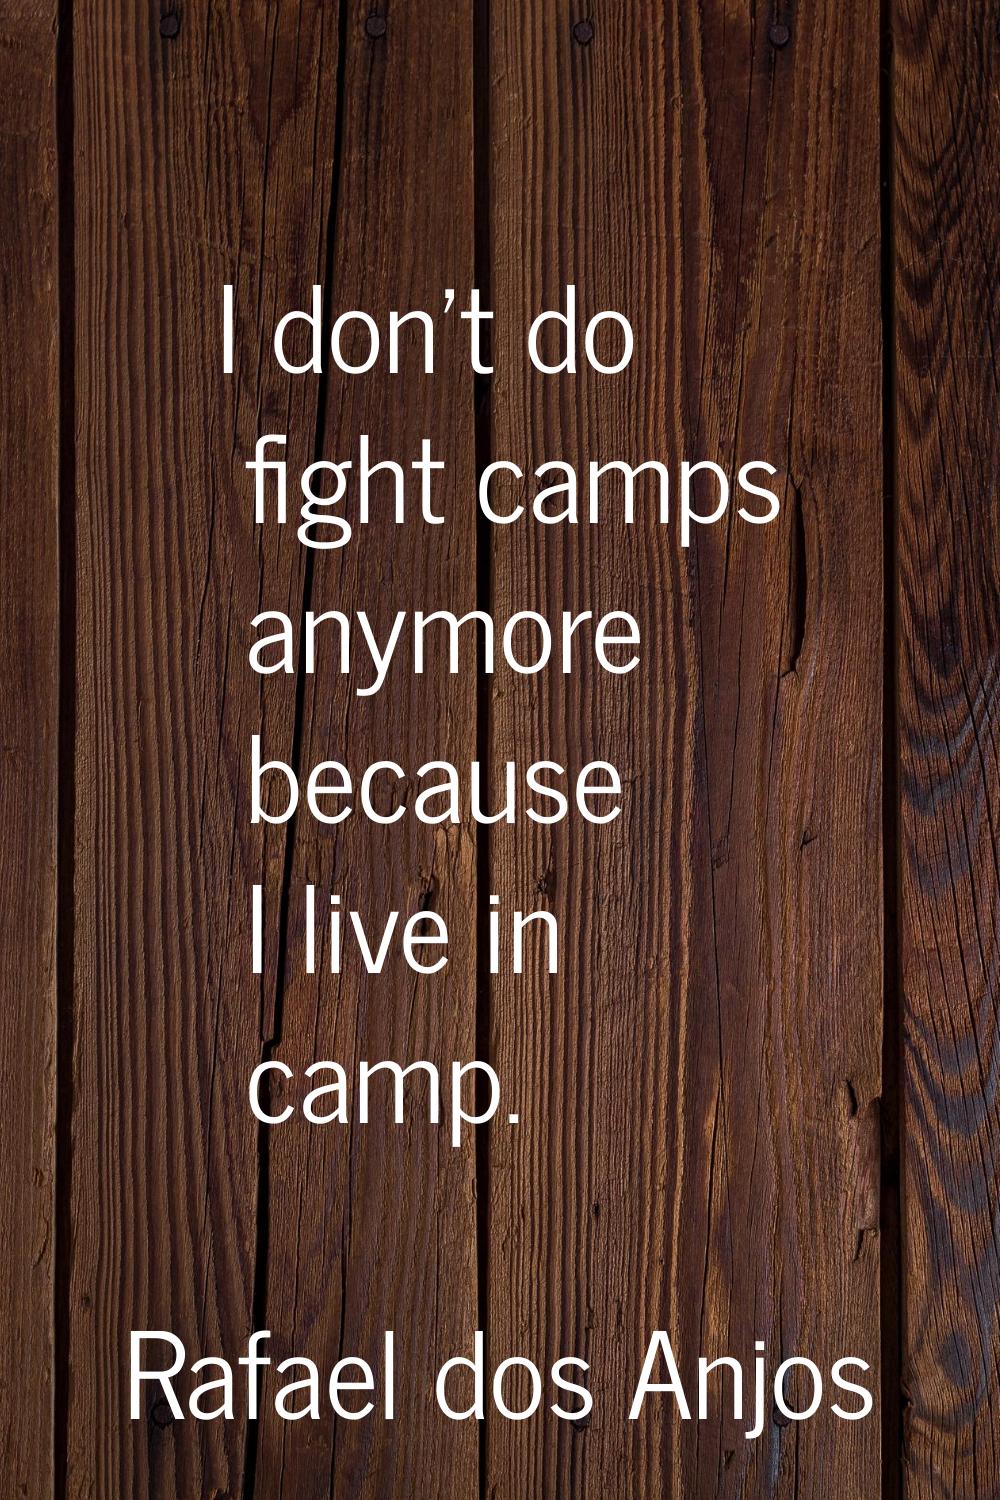 I don't do fight camps anymore because I live in camp.